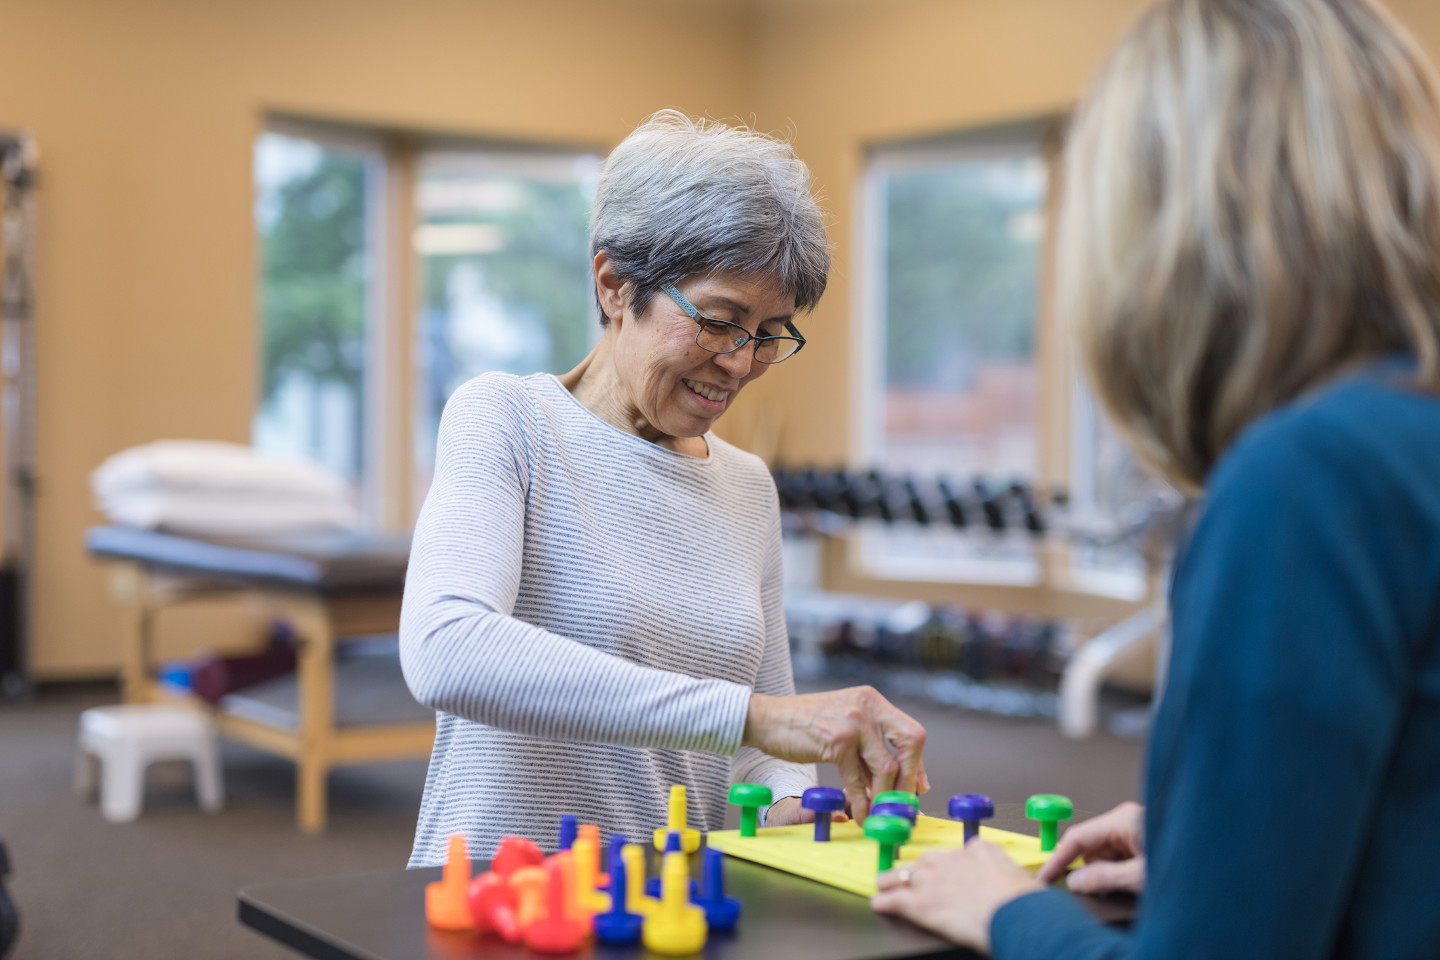 An occupational therapist works with a senior Caucasian woman They are seated at a table and they are doing a fun exercise that involves putting pegs into a plastic board.